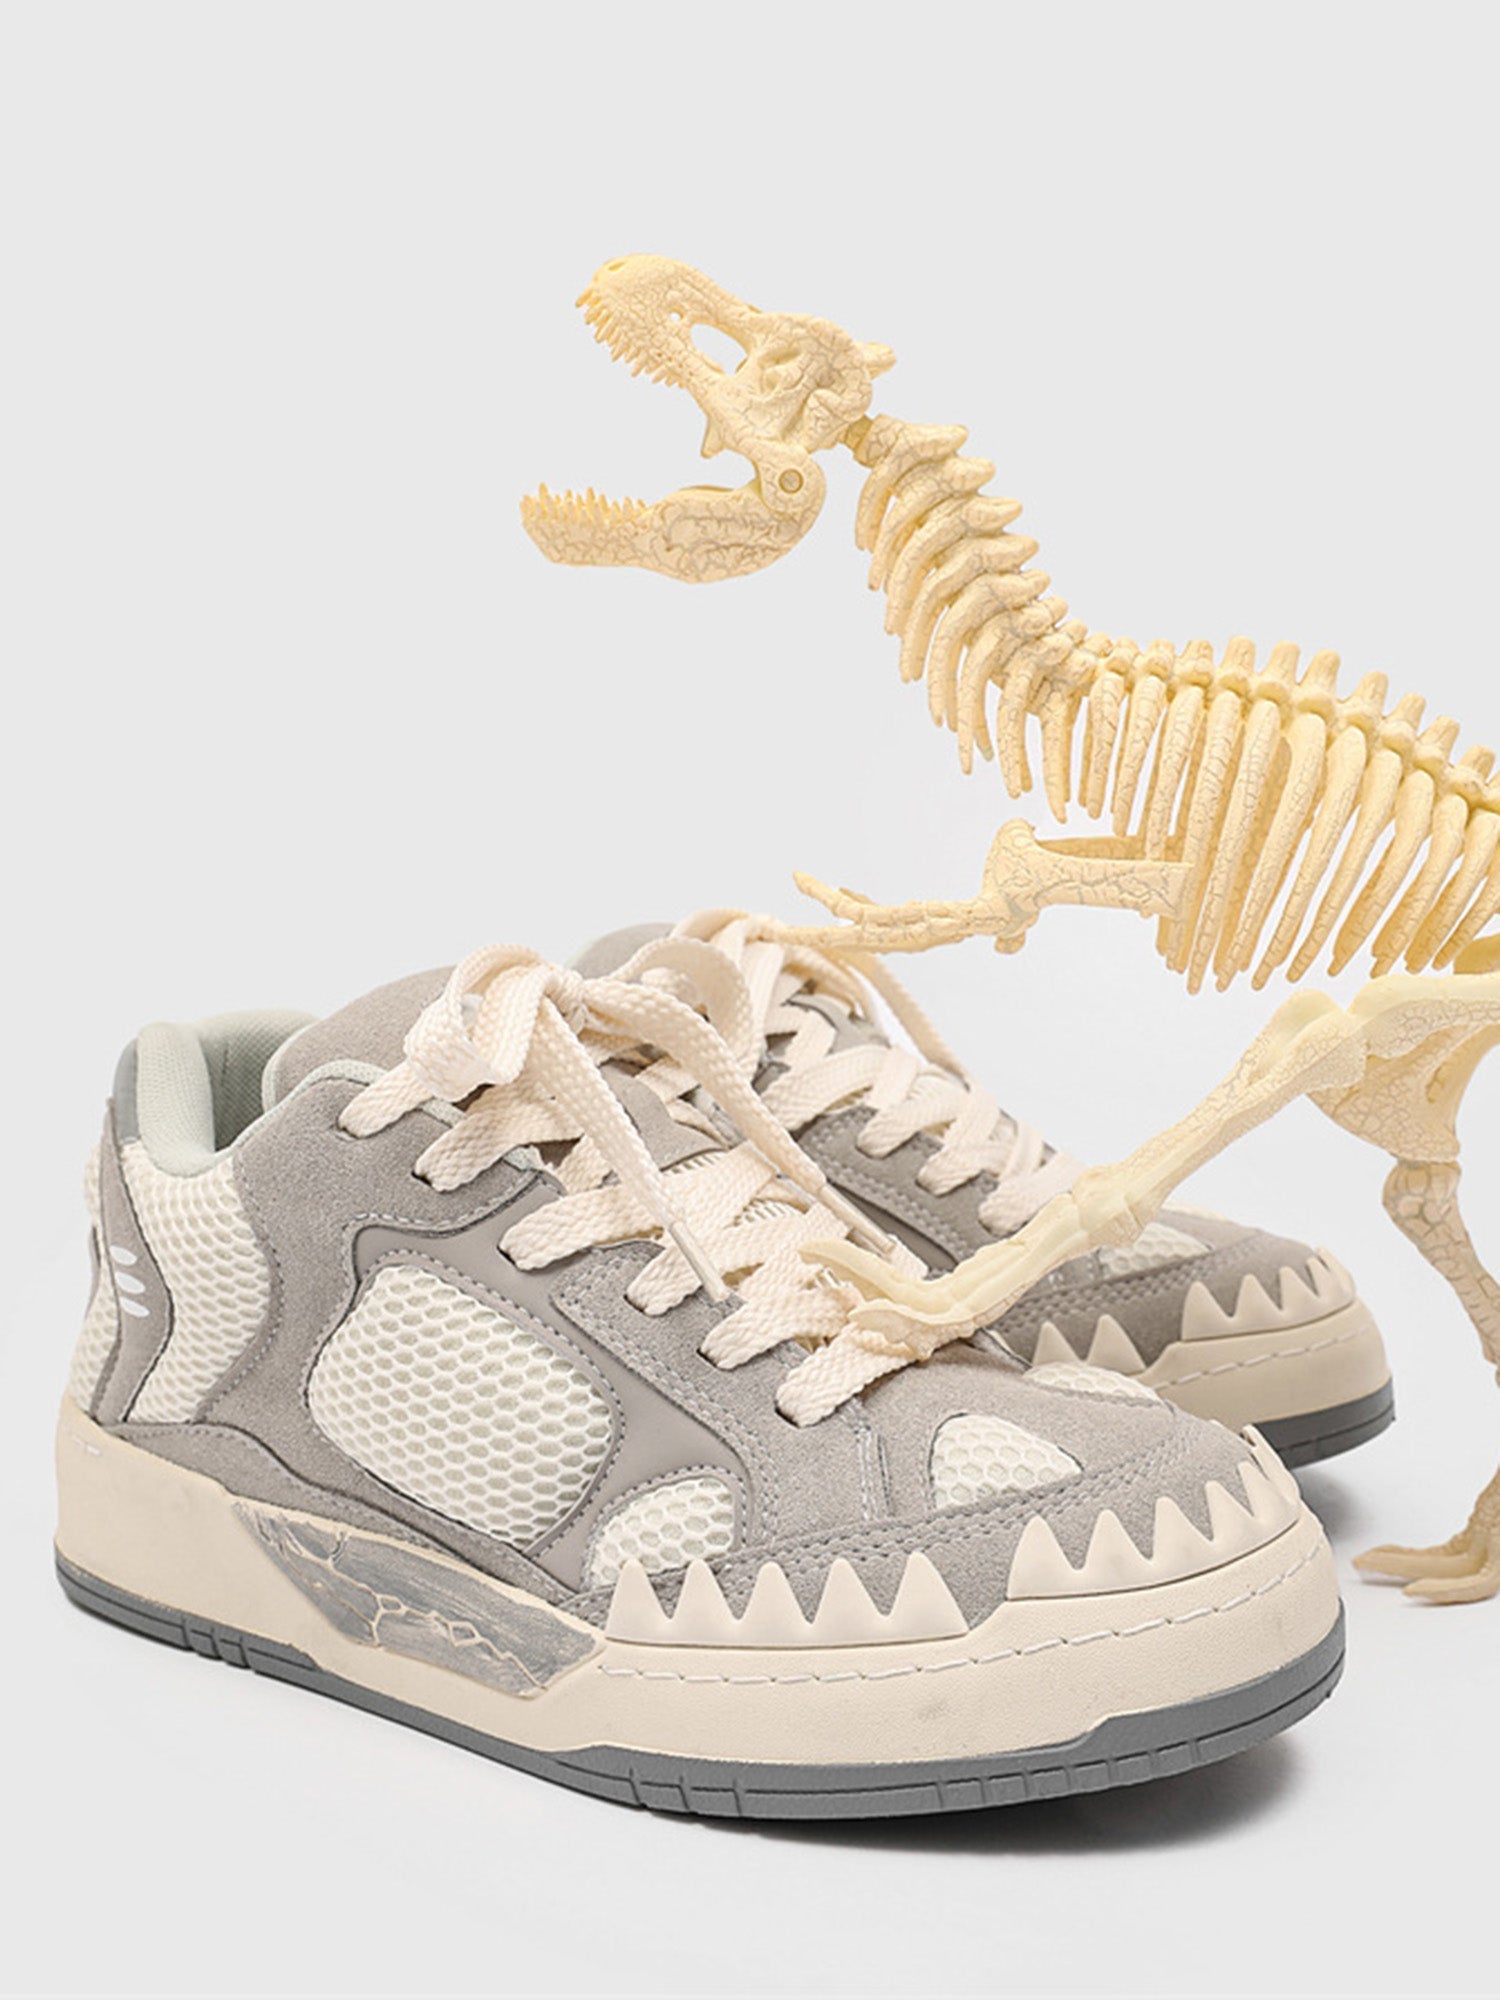 Dinosaur Exoskeleton Hip Hop Thick Sole Sneakers